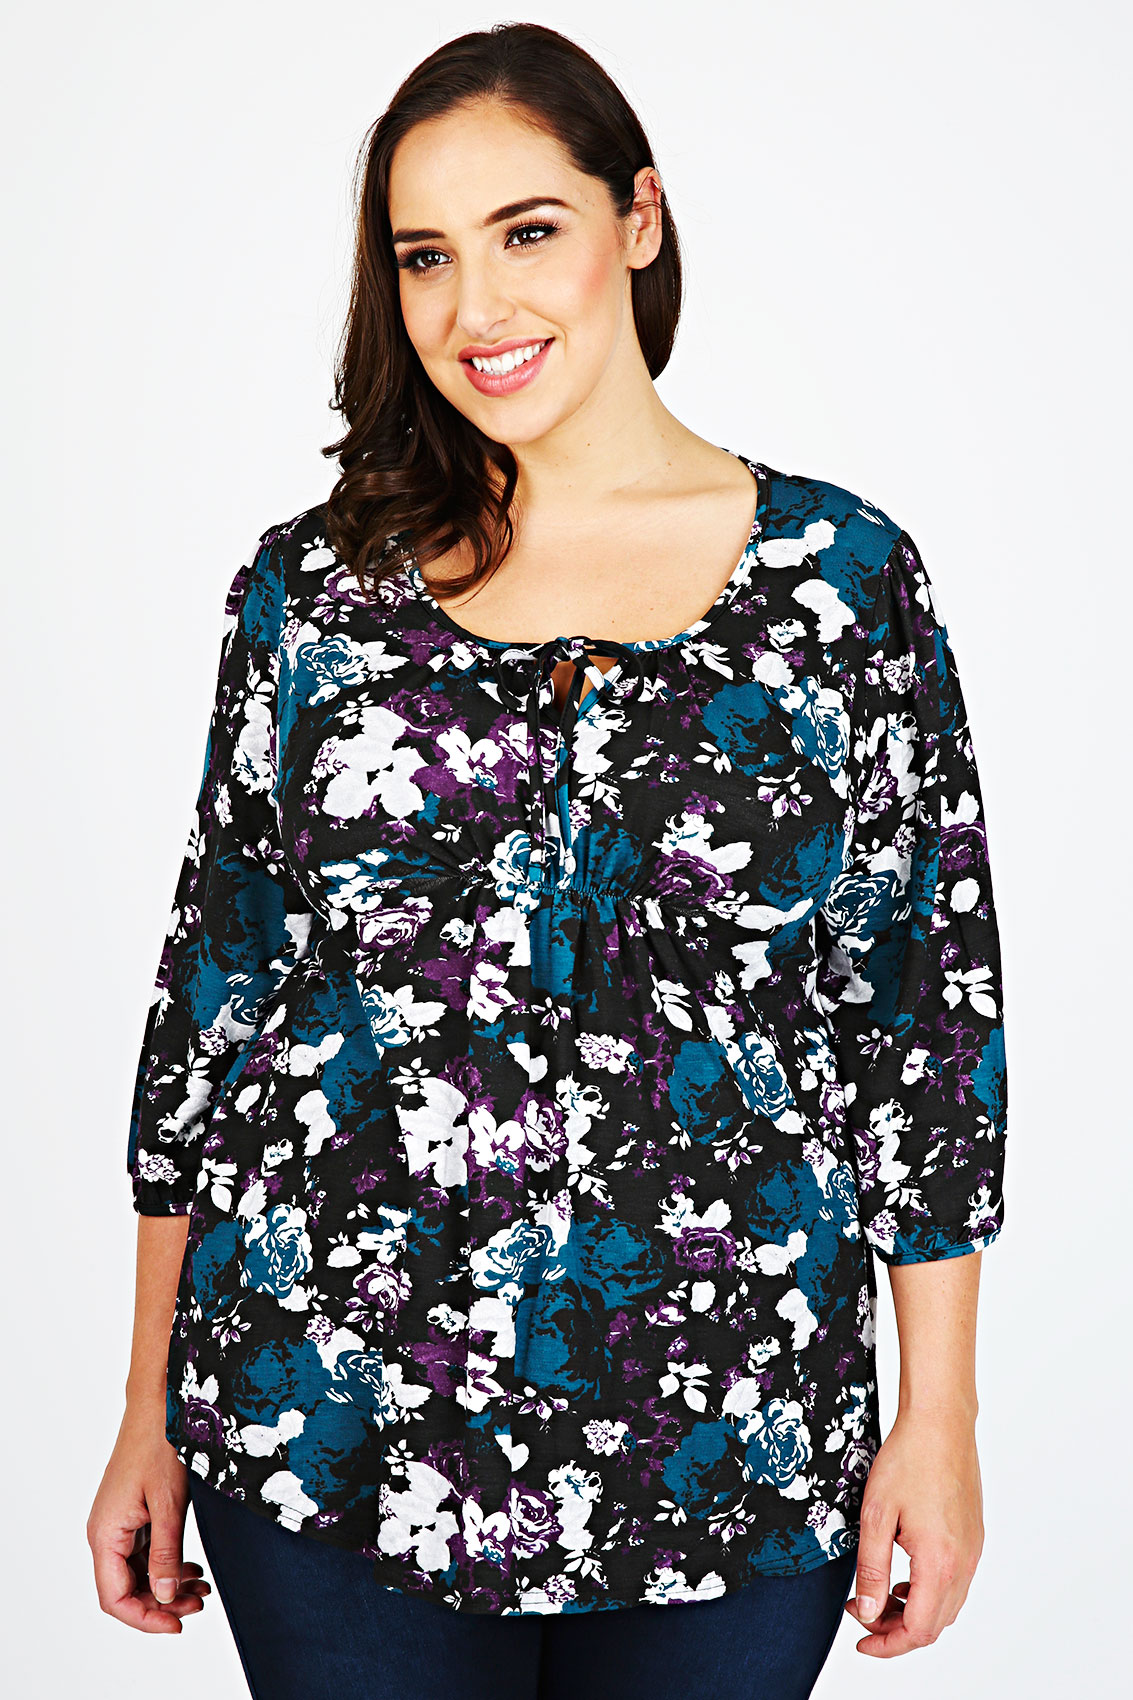 Floral Teal Smock Top With Keyhole Tie Neckline Plus Size 16 to 32